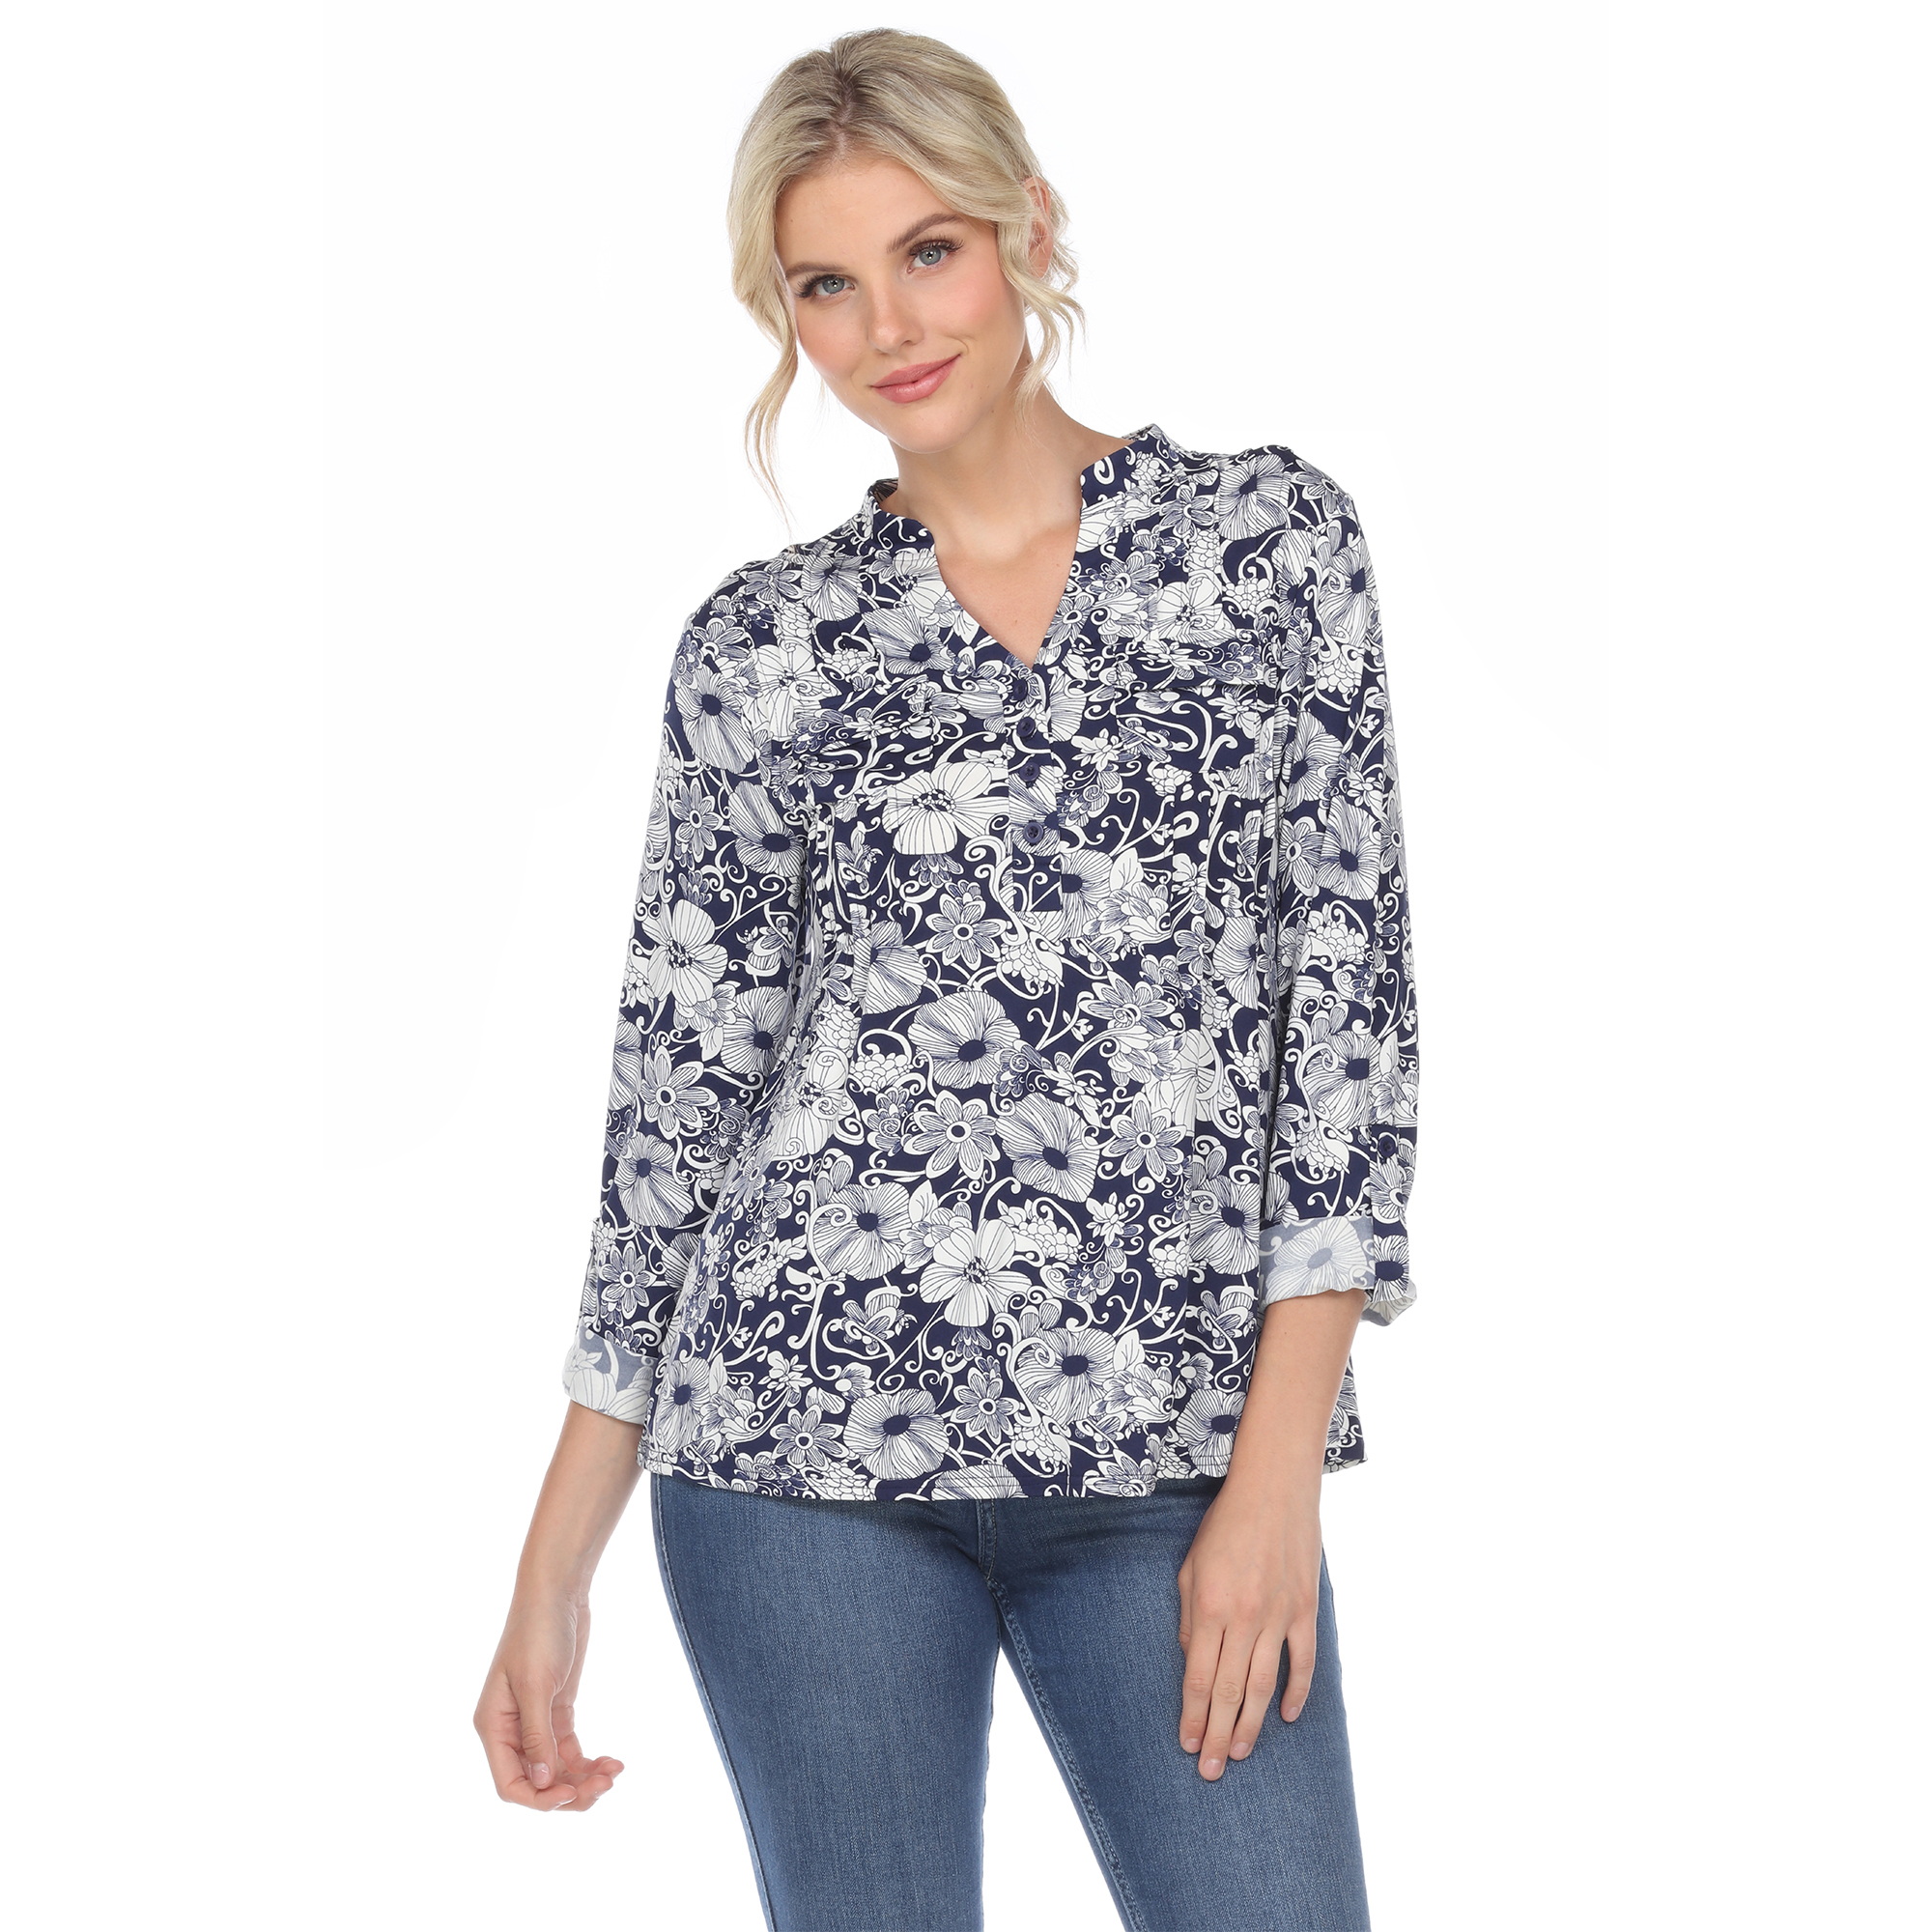 White Mark Women's Pleated Long Sleeve Floral Print Blouse - Navy, 2X